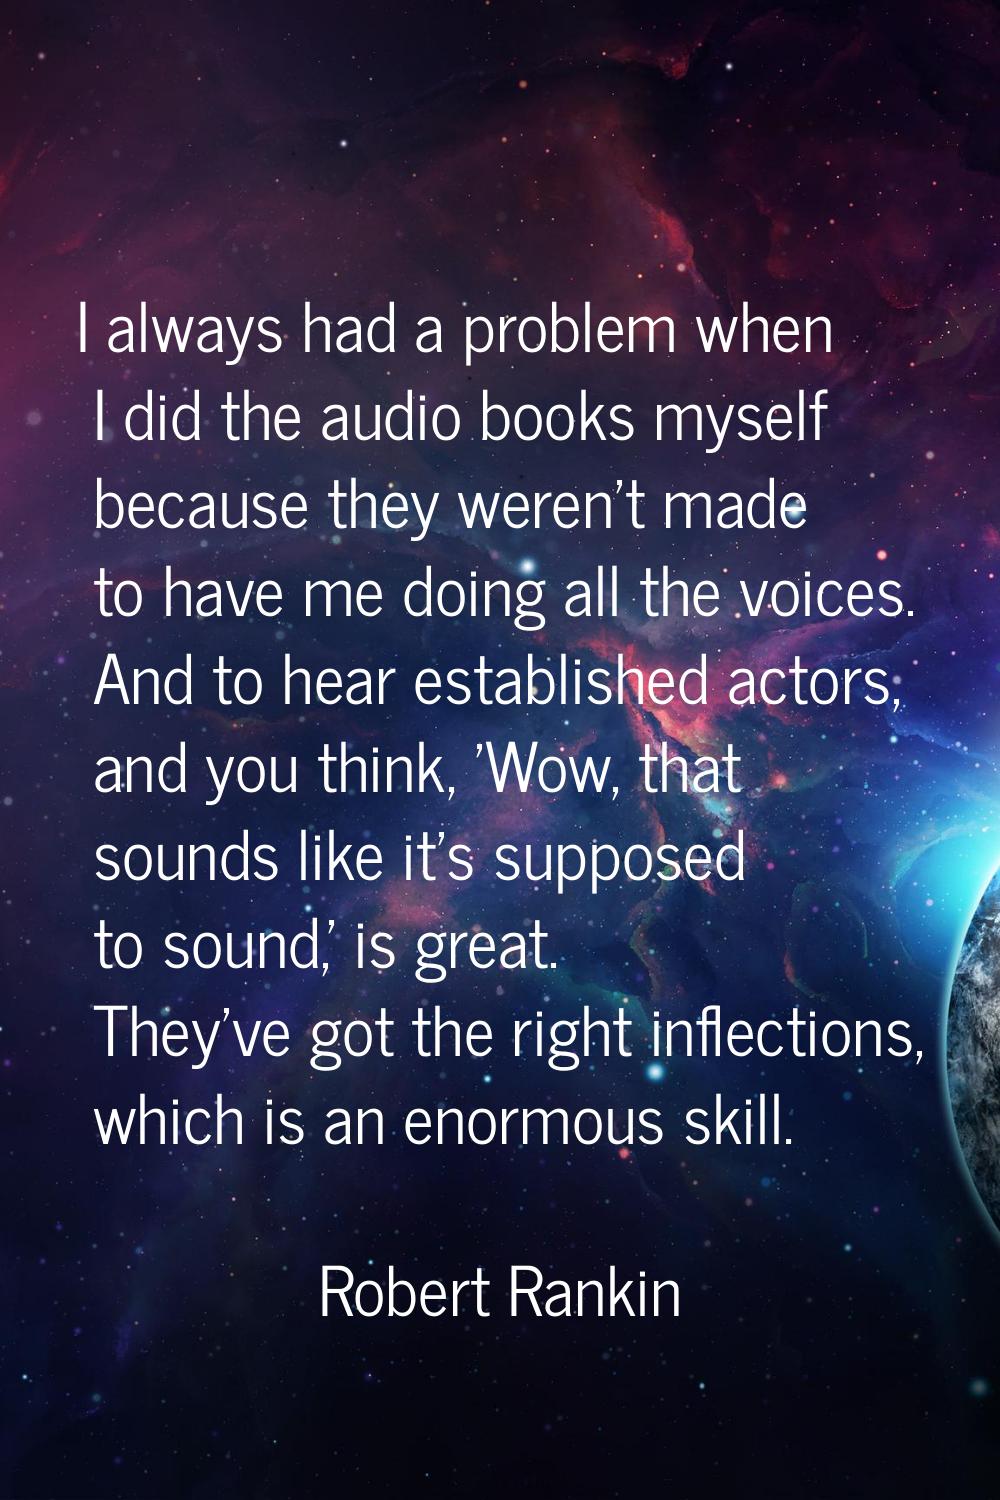 I always had a problem when I did the audio books myself because they weren't made to have me doing